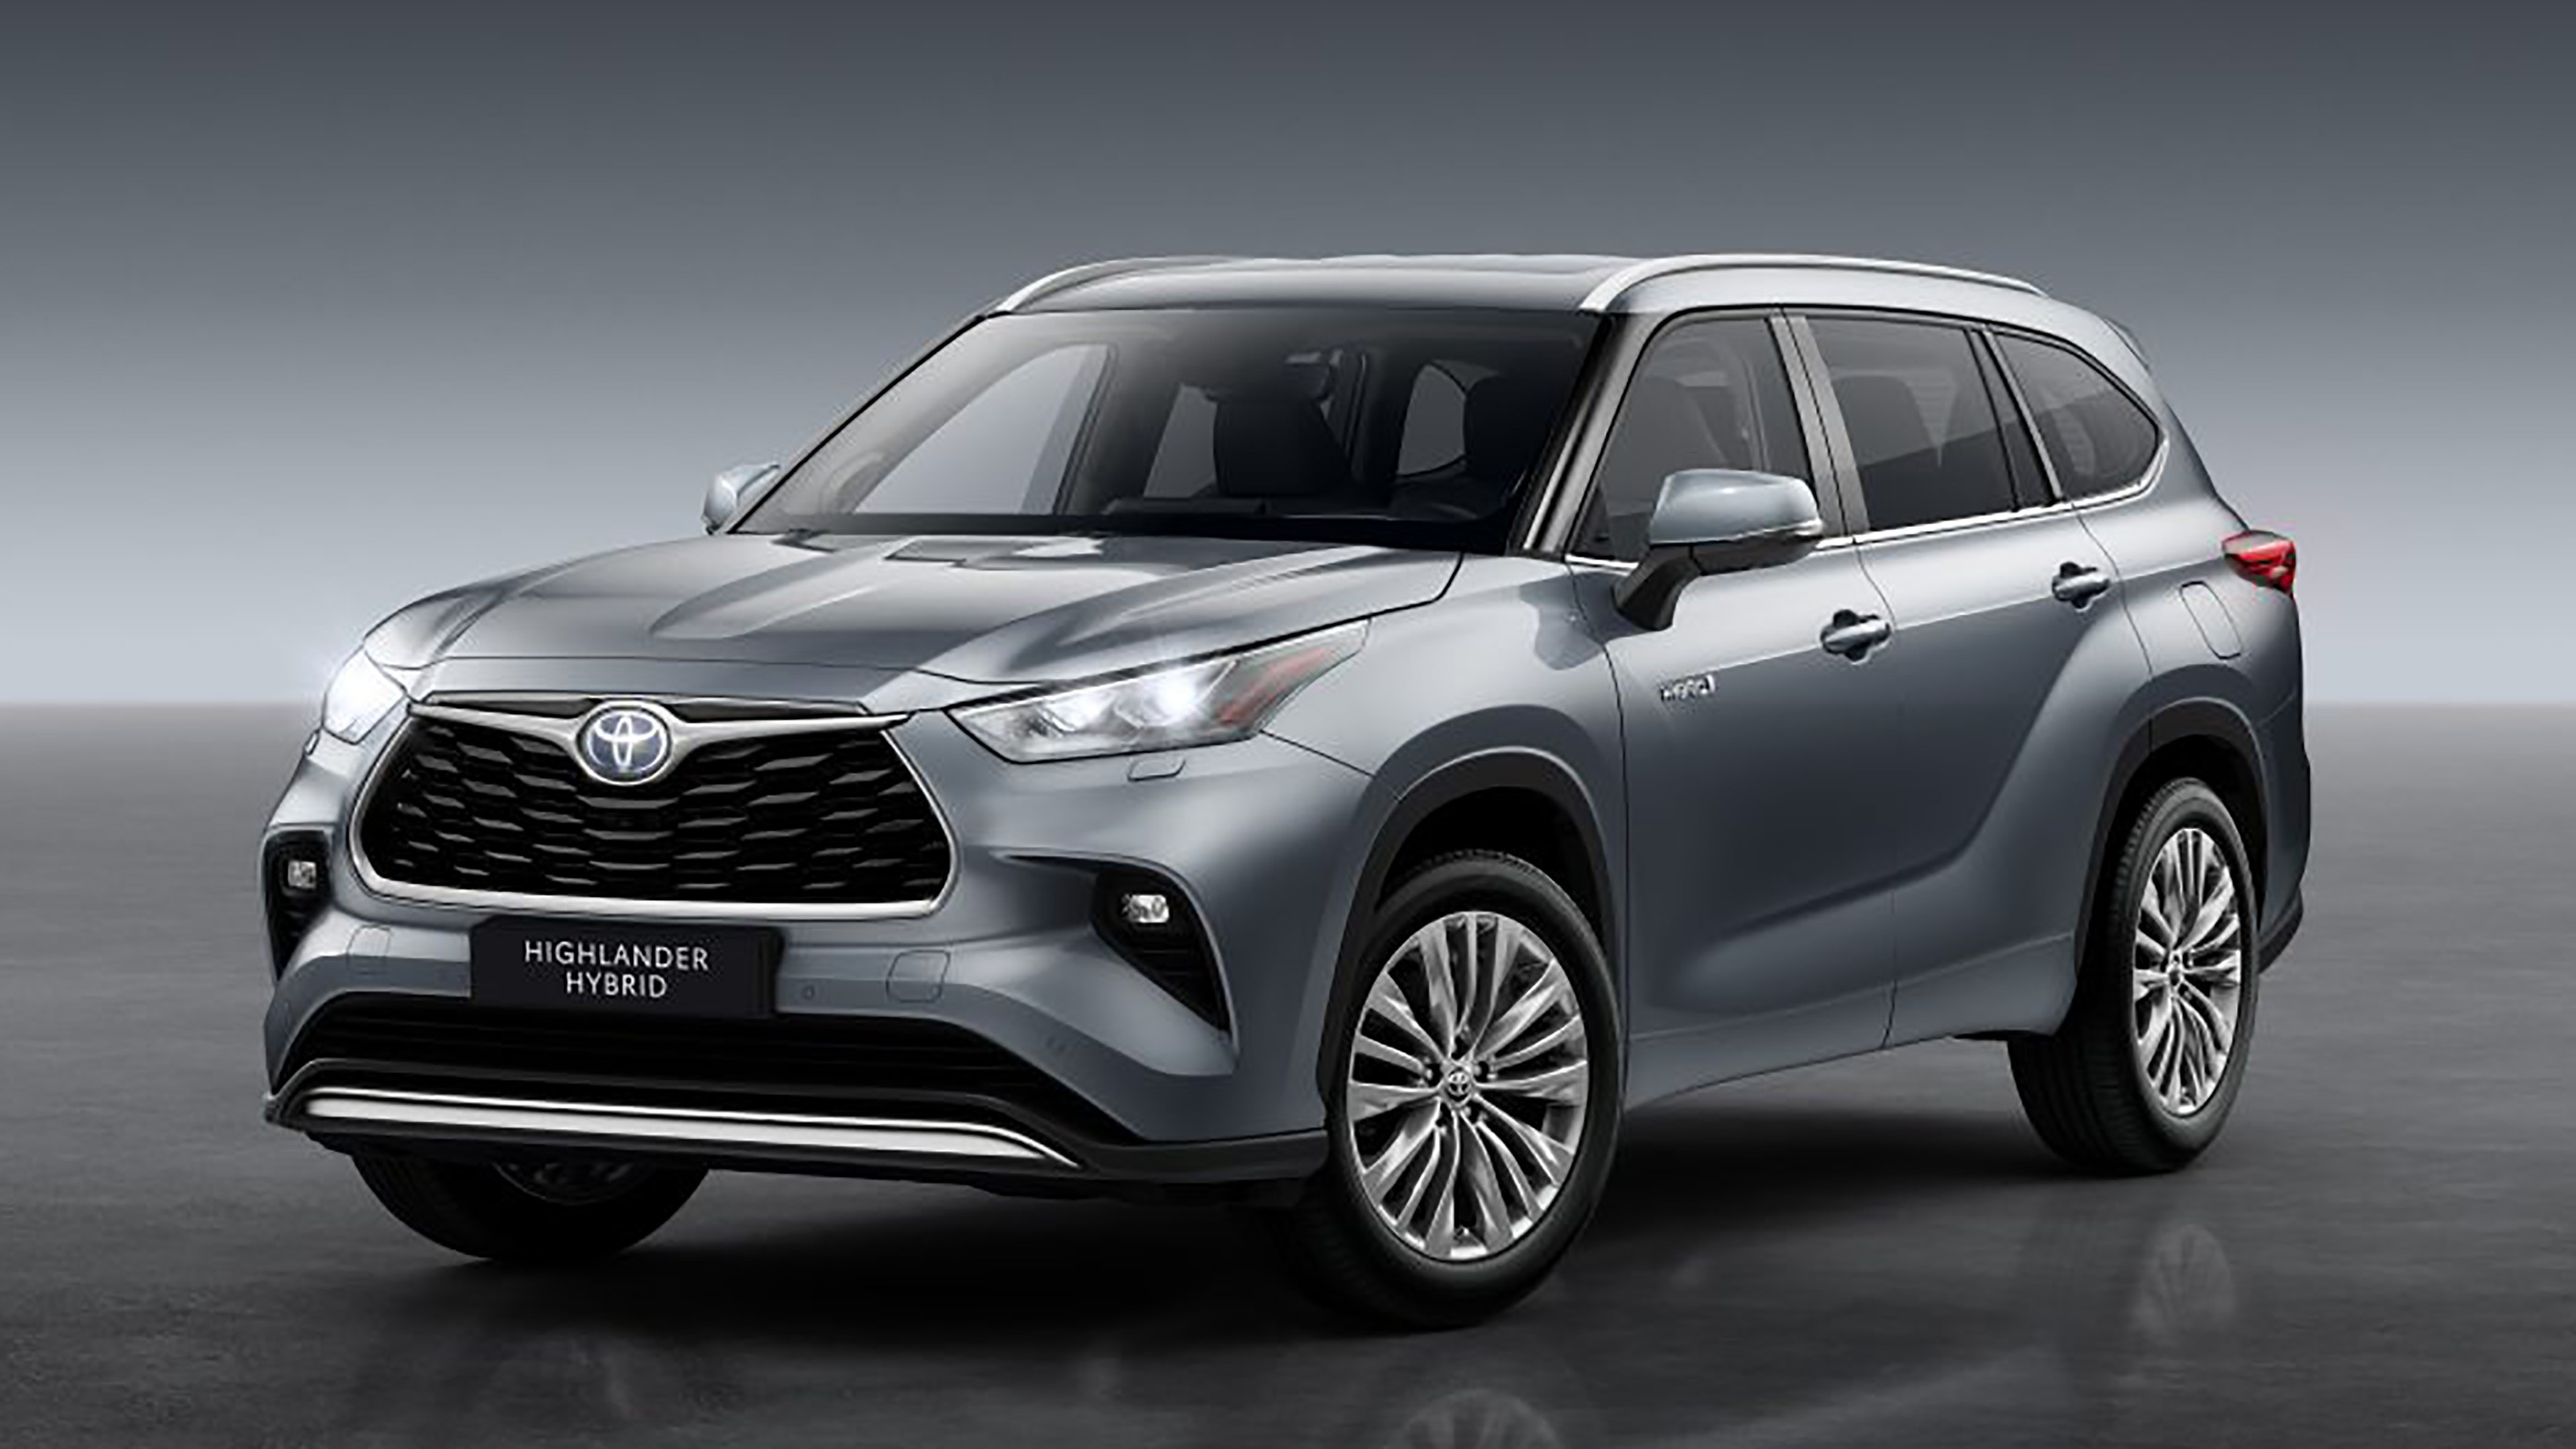 New seven-seat Toyota Highlander SUV coming to the UK in 